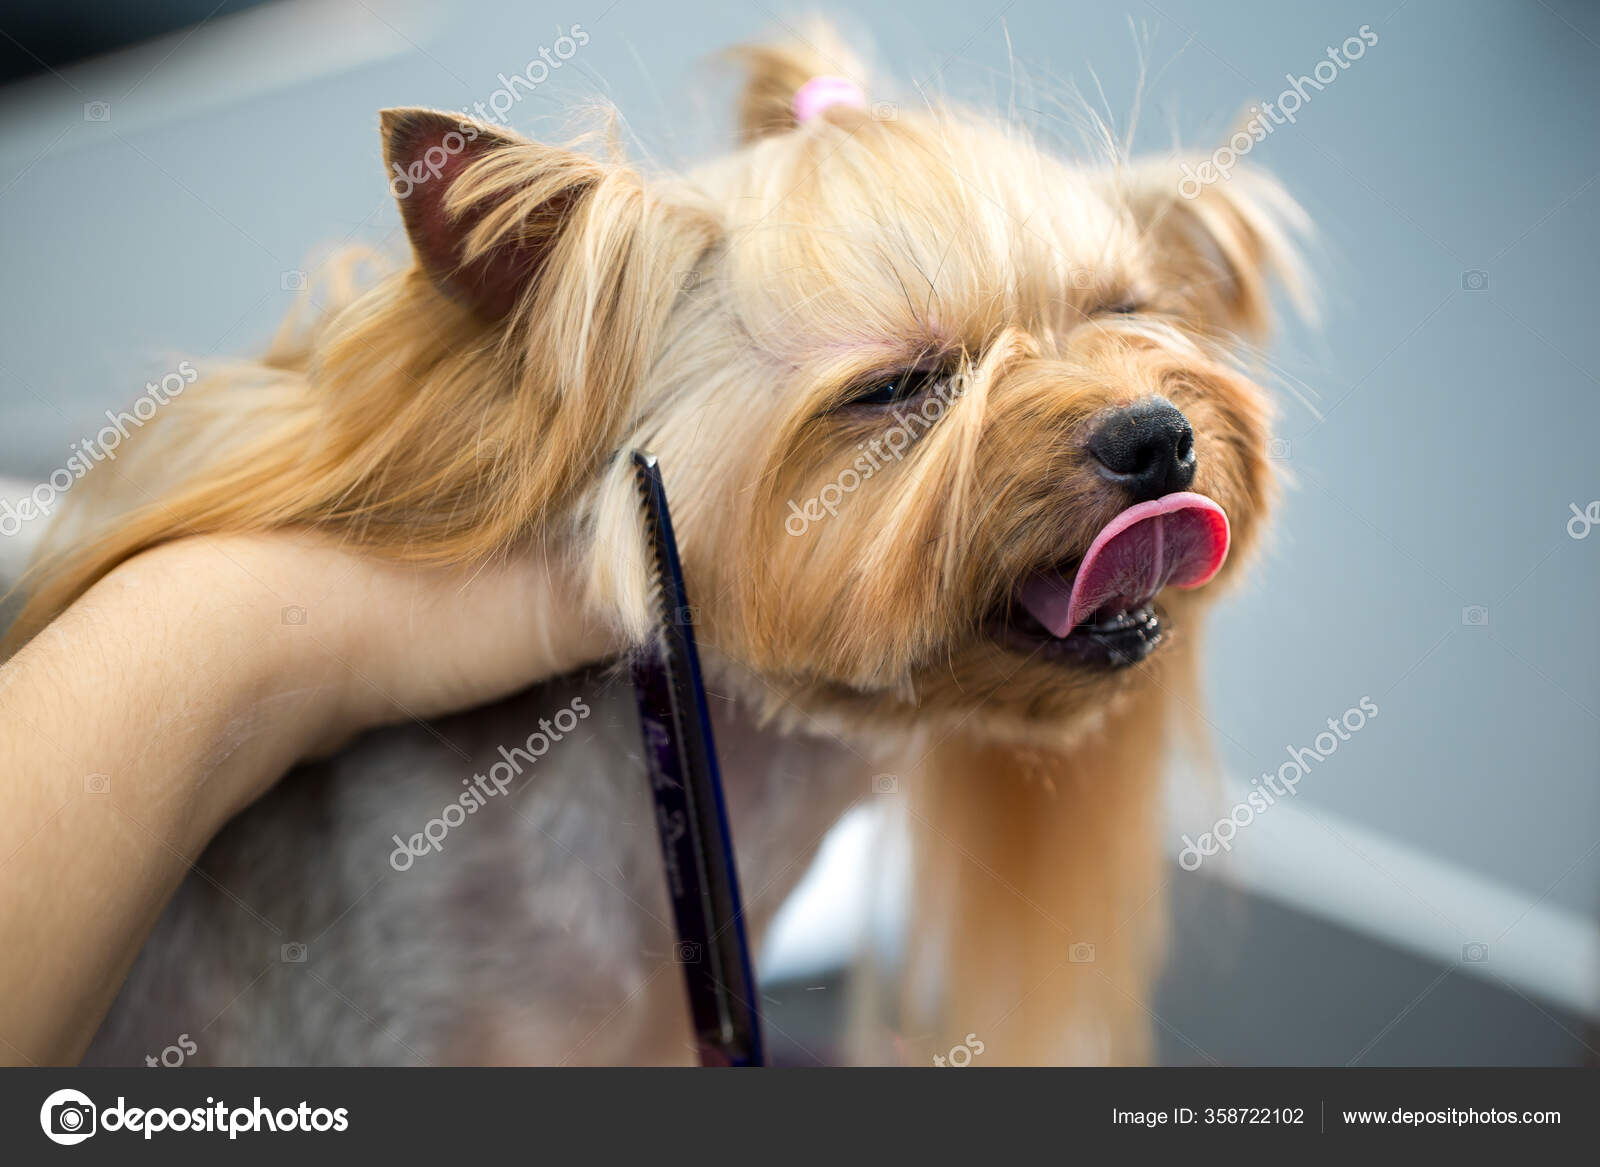 Female groomer haircut yorkshire terrier on the table for grooming in the beauty salon for dogs. Toned image. process of final shearing of a dog's hair with scissors.